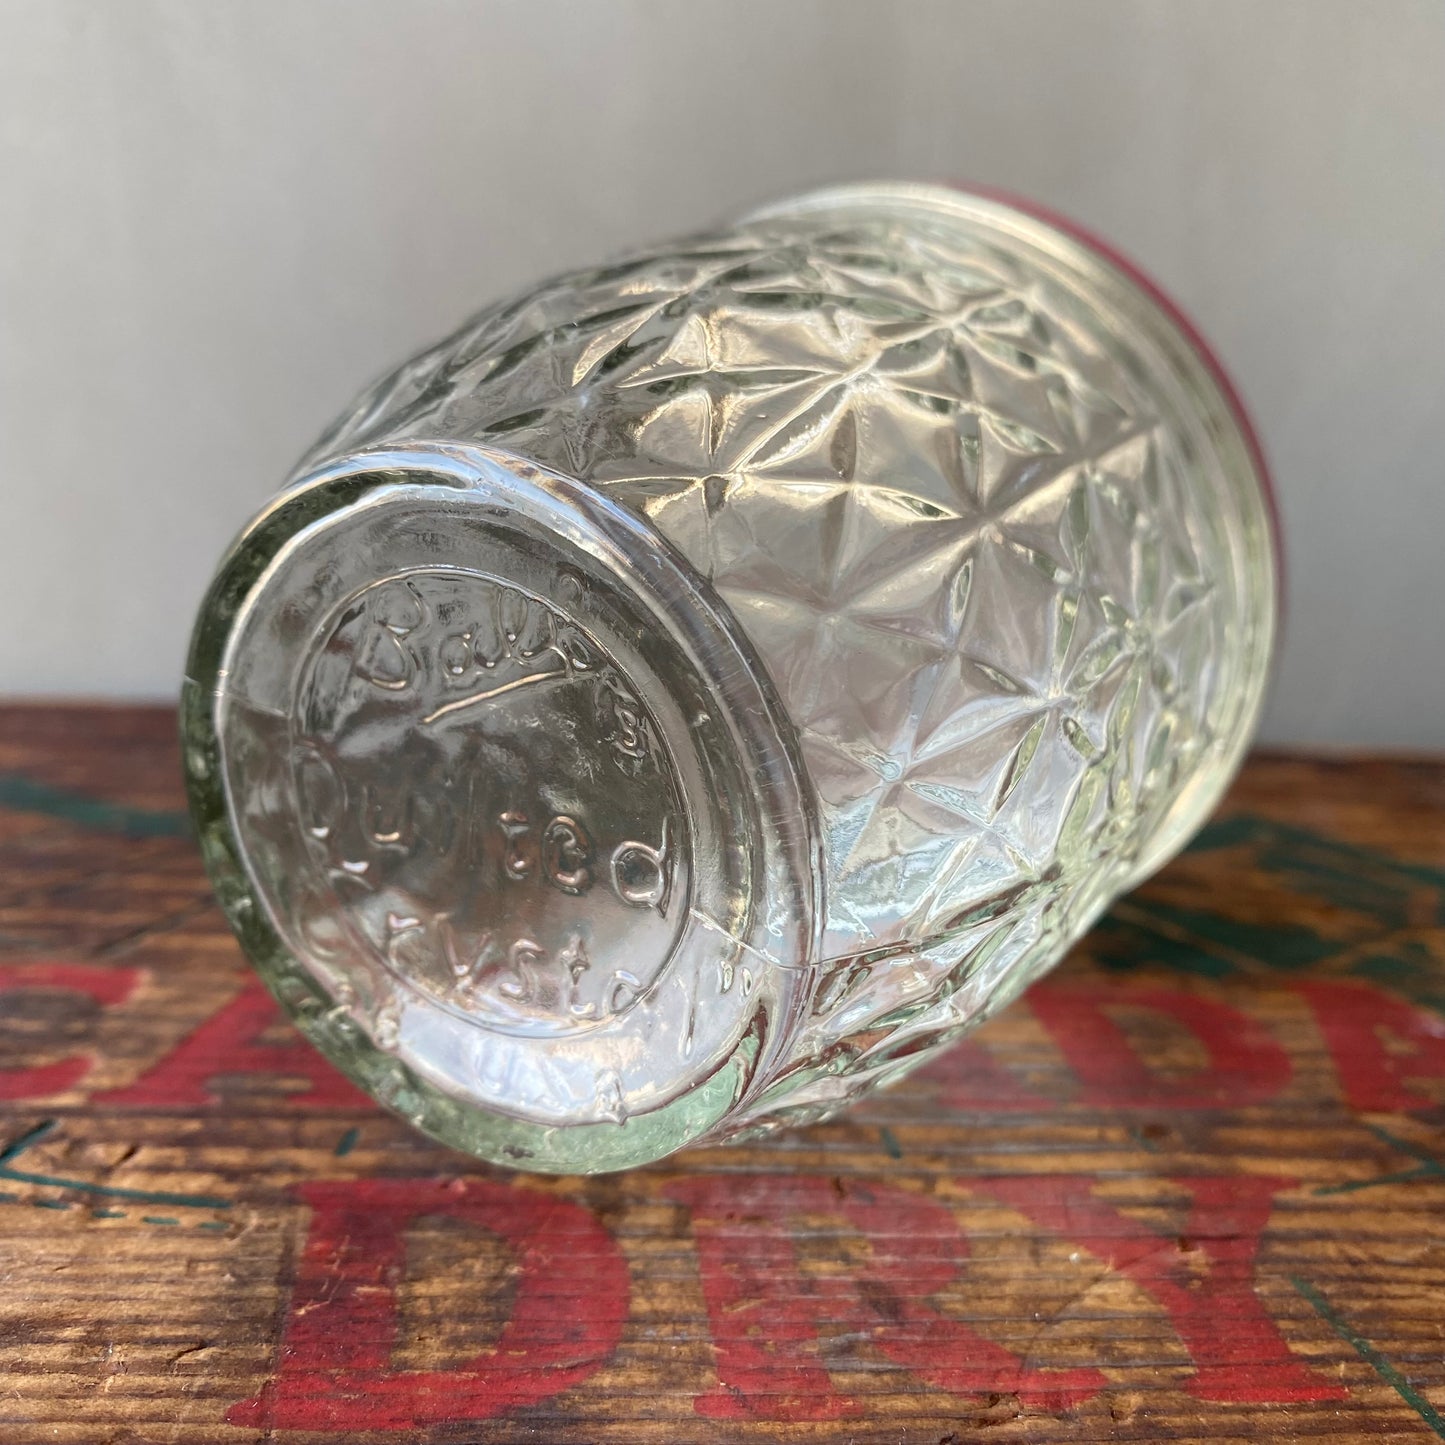 【1960s USA vintage】Ball Quilted Crystal
jelly glass